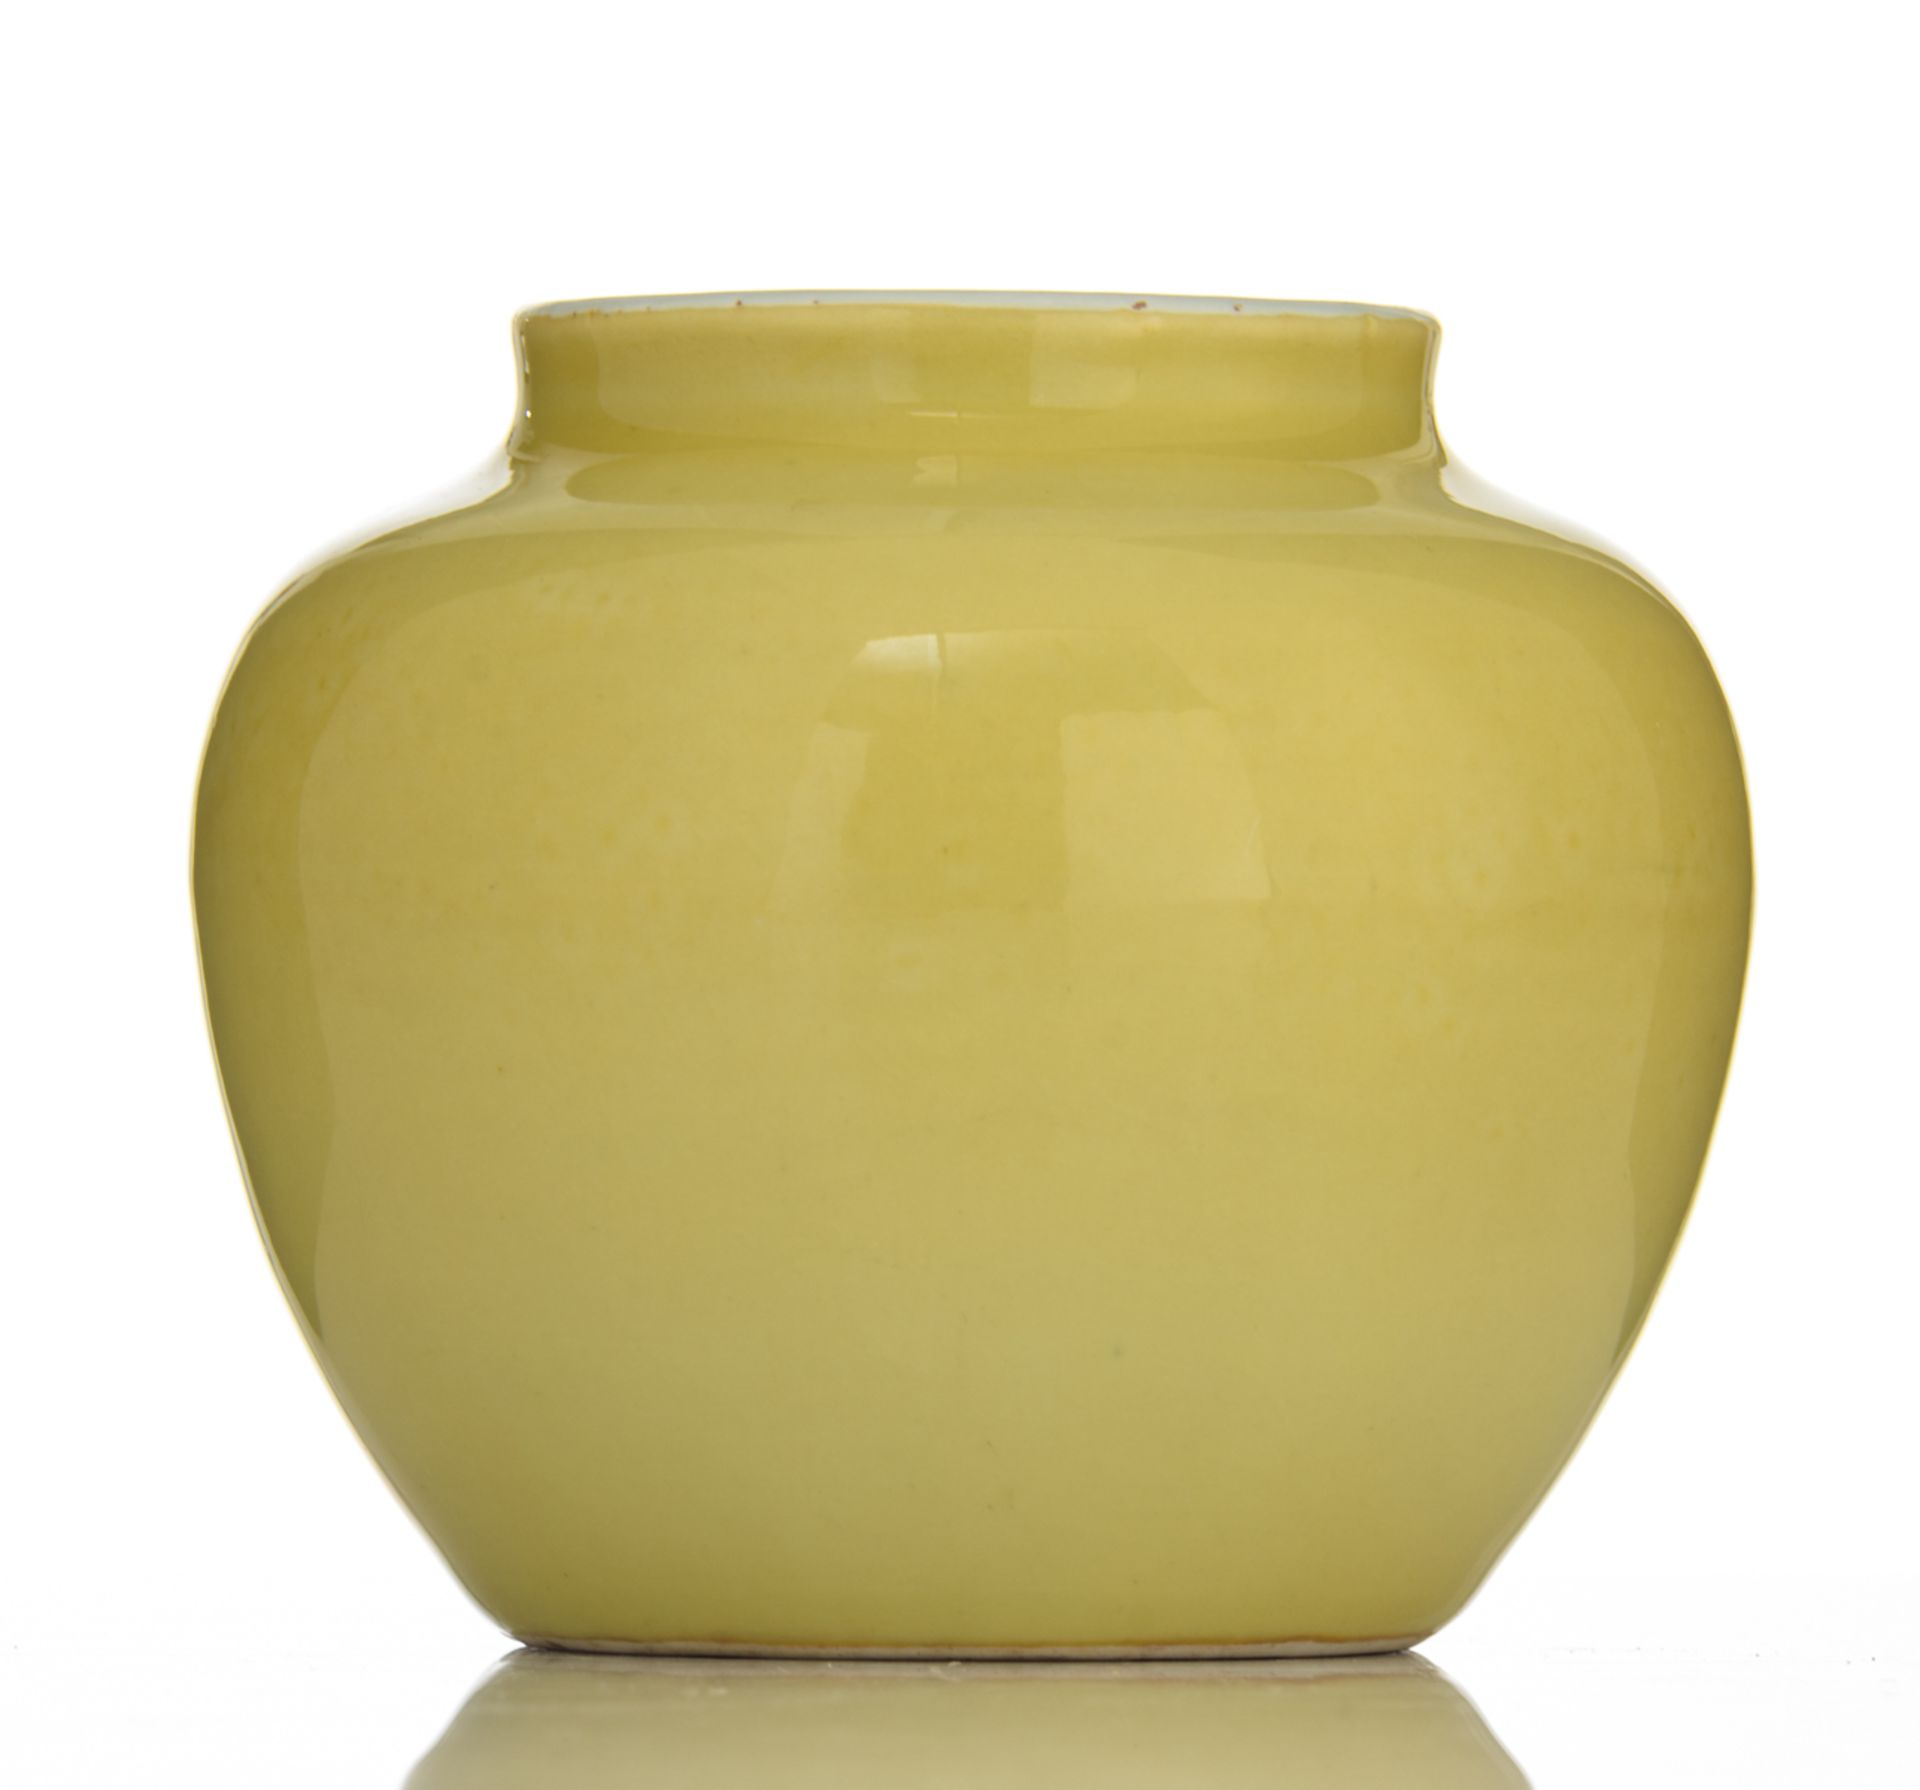 A Chinese yellow crackle-glazed jar, with a Jiajing mark, H 13 - ø 15 cm - Image 4 of 9